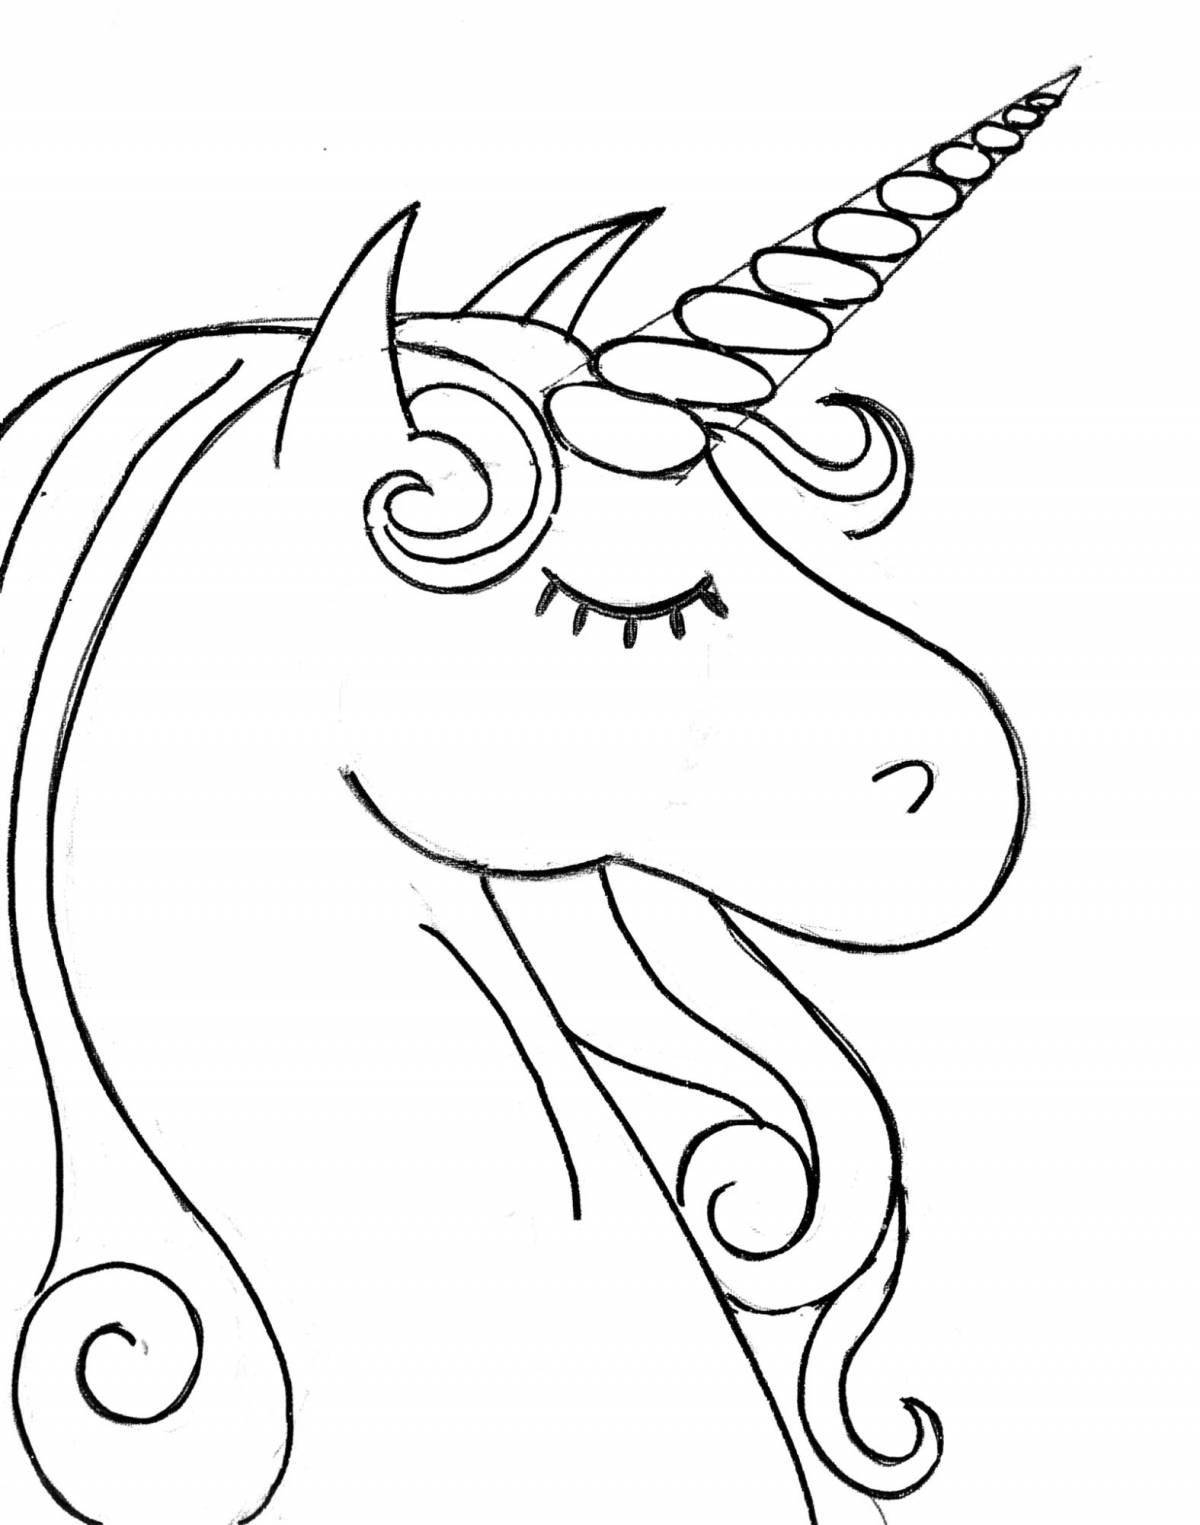 Bright coloring how to draw a unicorn